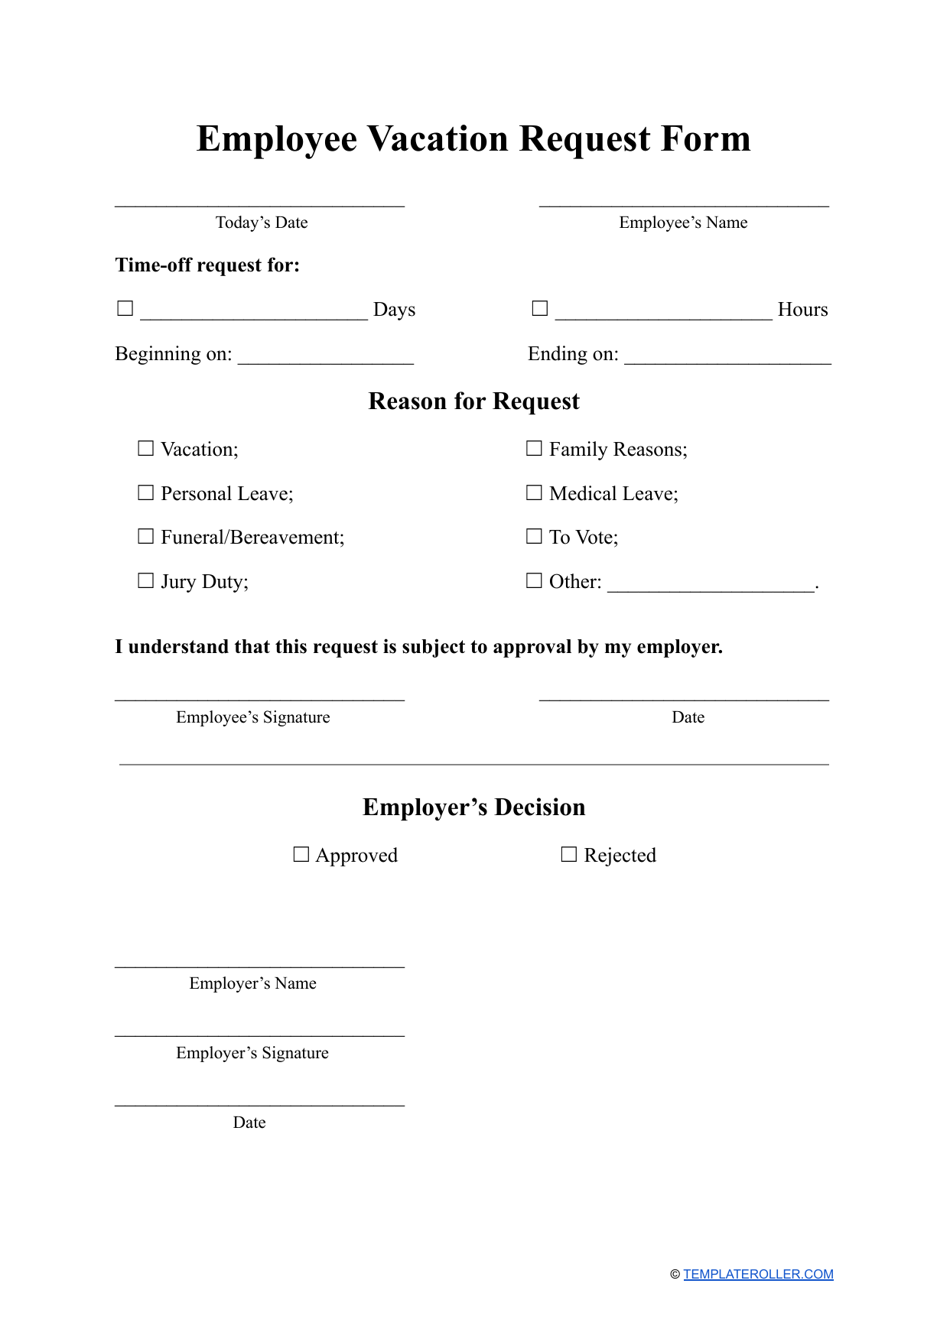 printable-vacation-request-form-template-printable-world-holiday